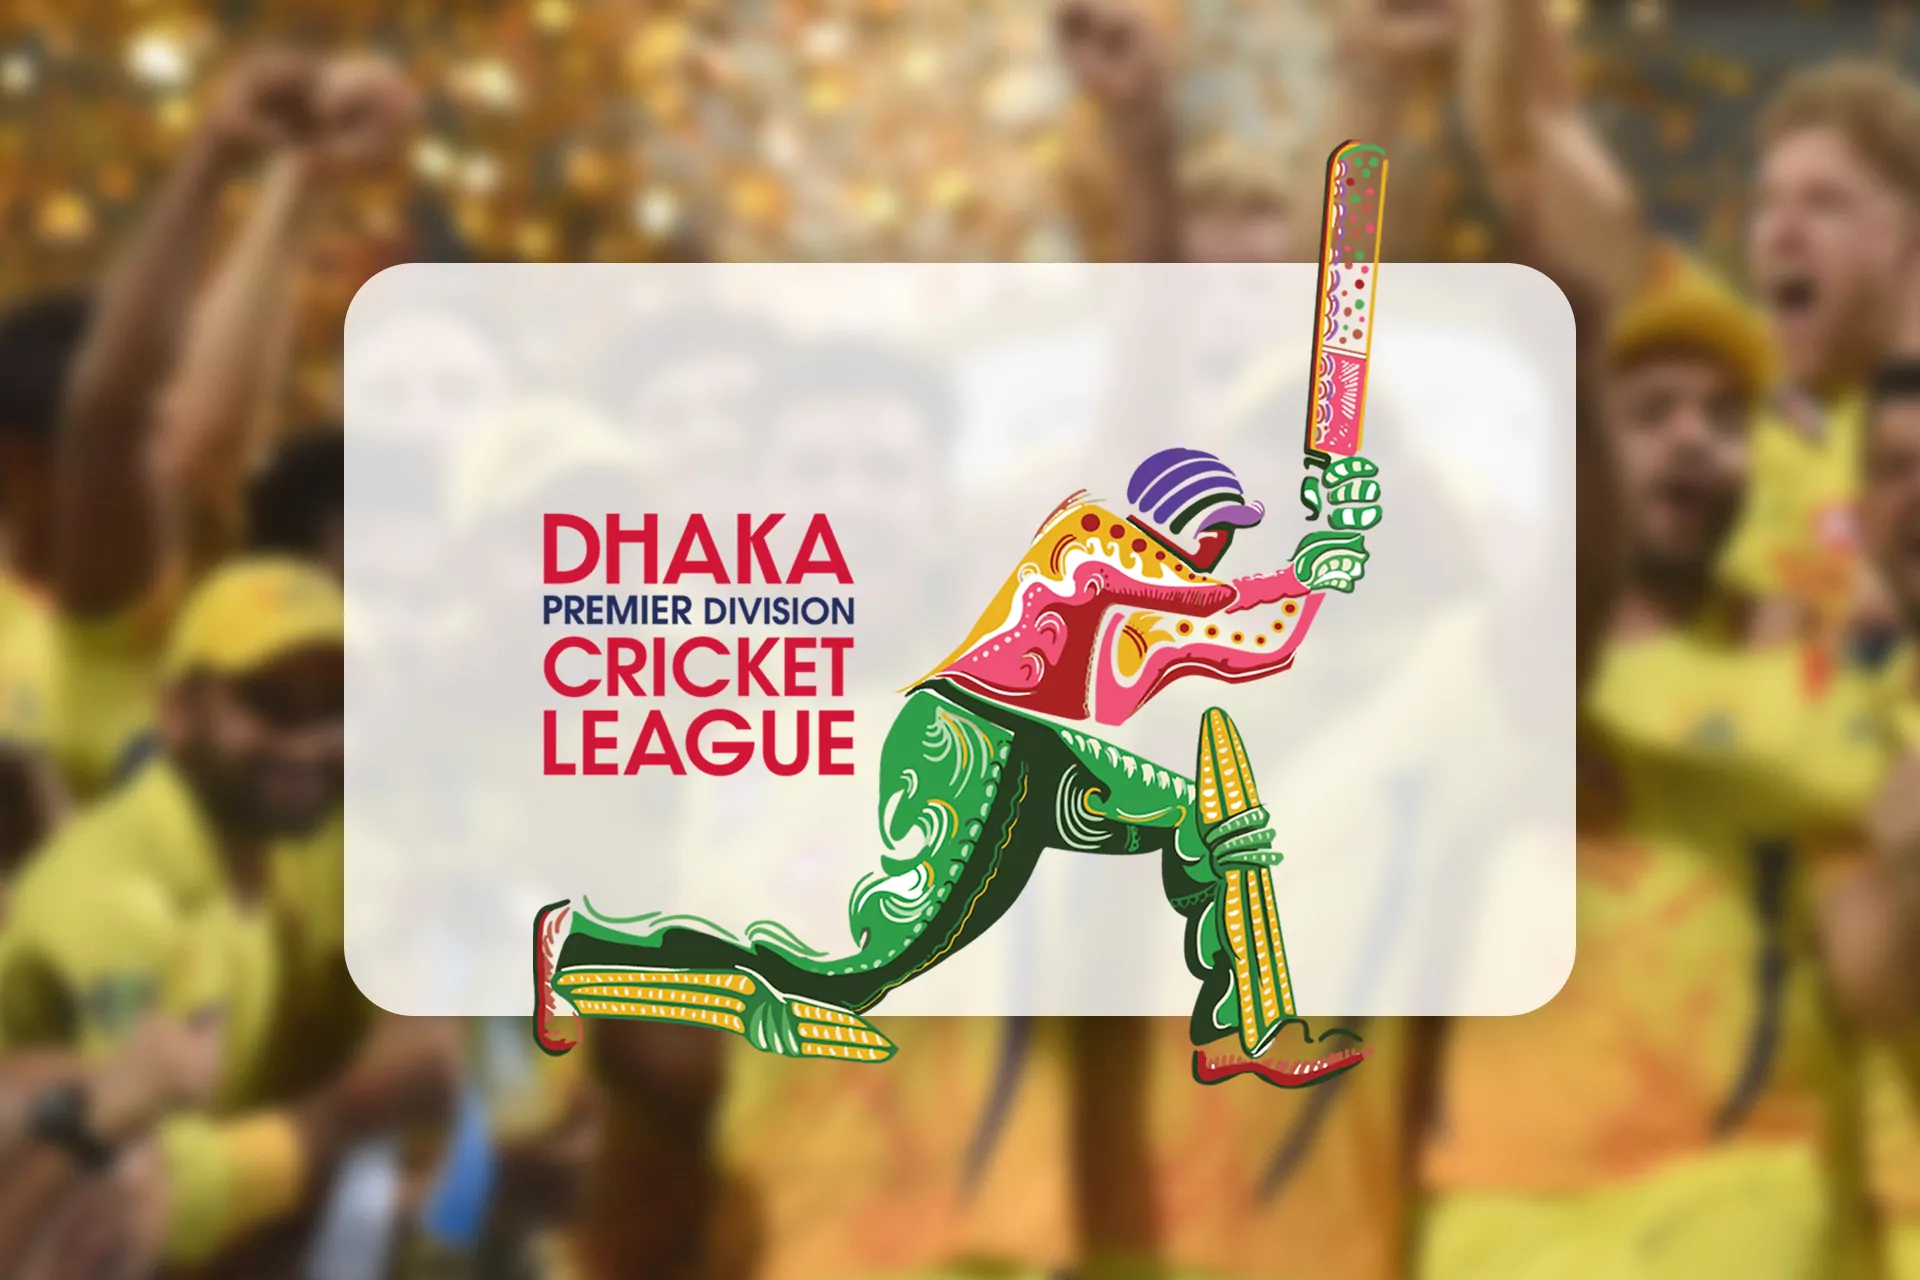 There are usually 12 teams that take part in the Dhaka Premier Cricket League.